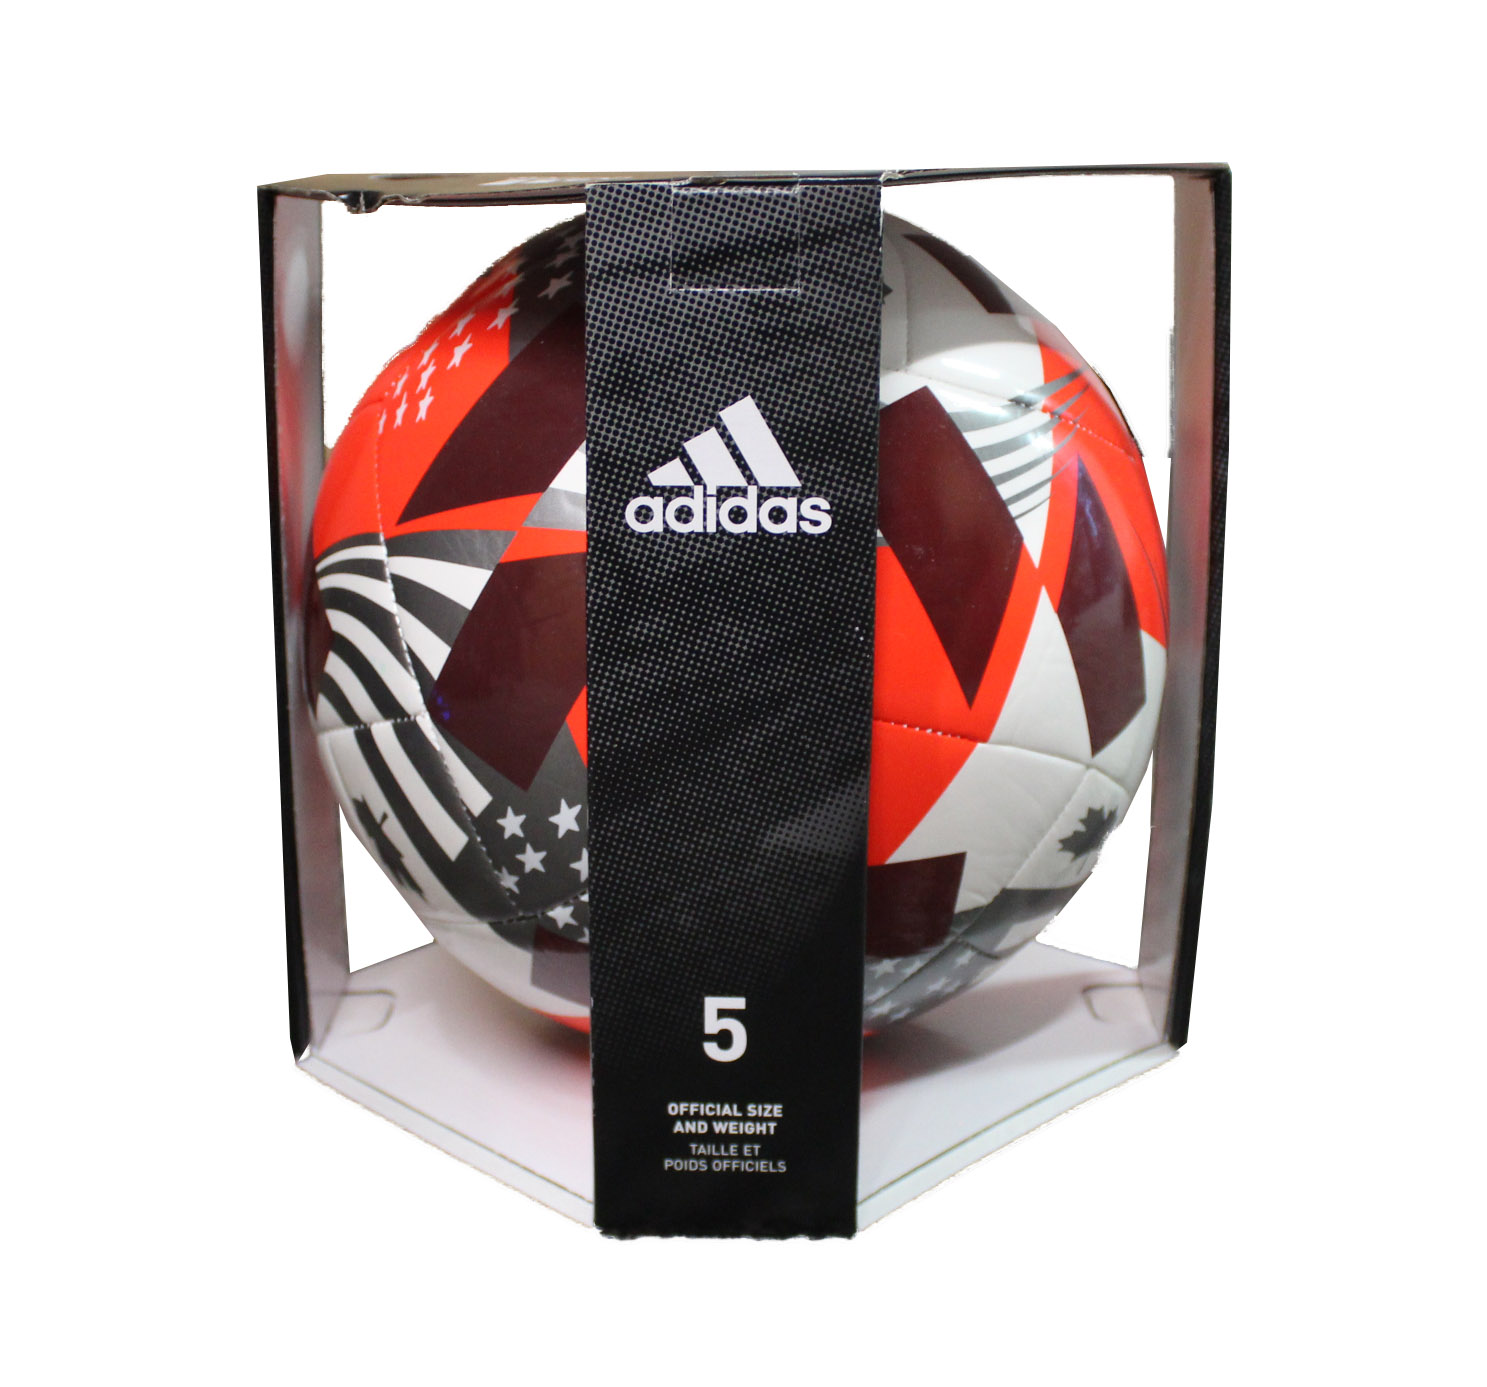 adidas Unisex-Adult Official MLS Soccer Ball Size 5 - image 1 of 4